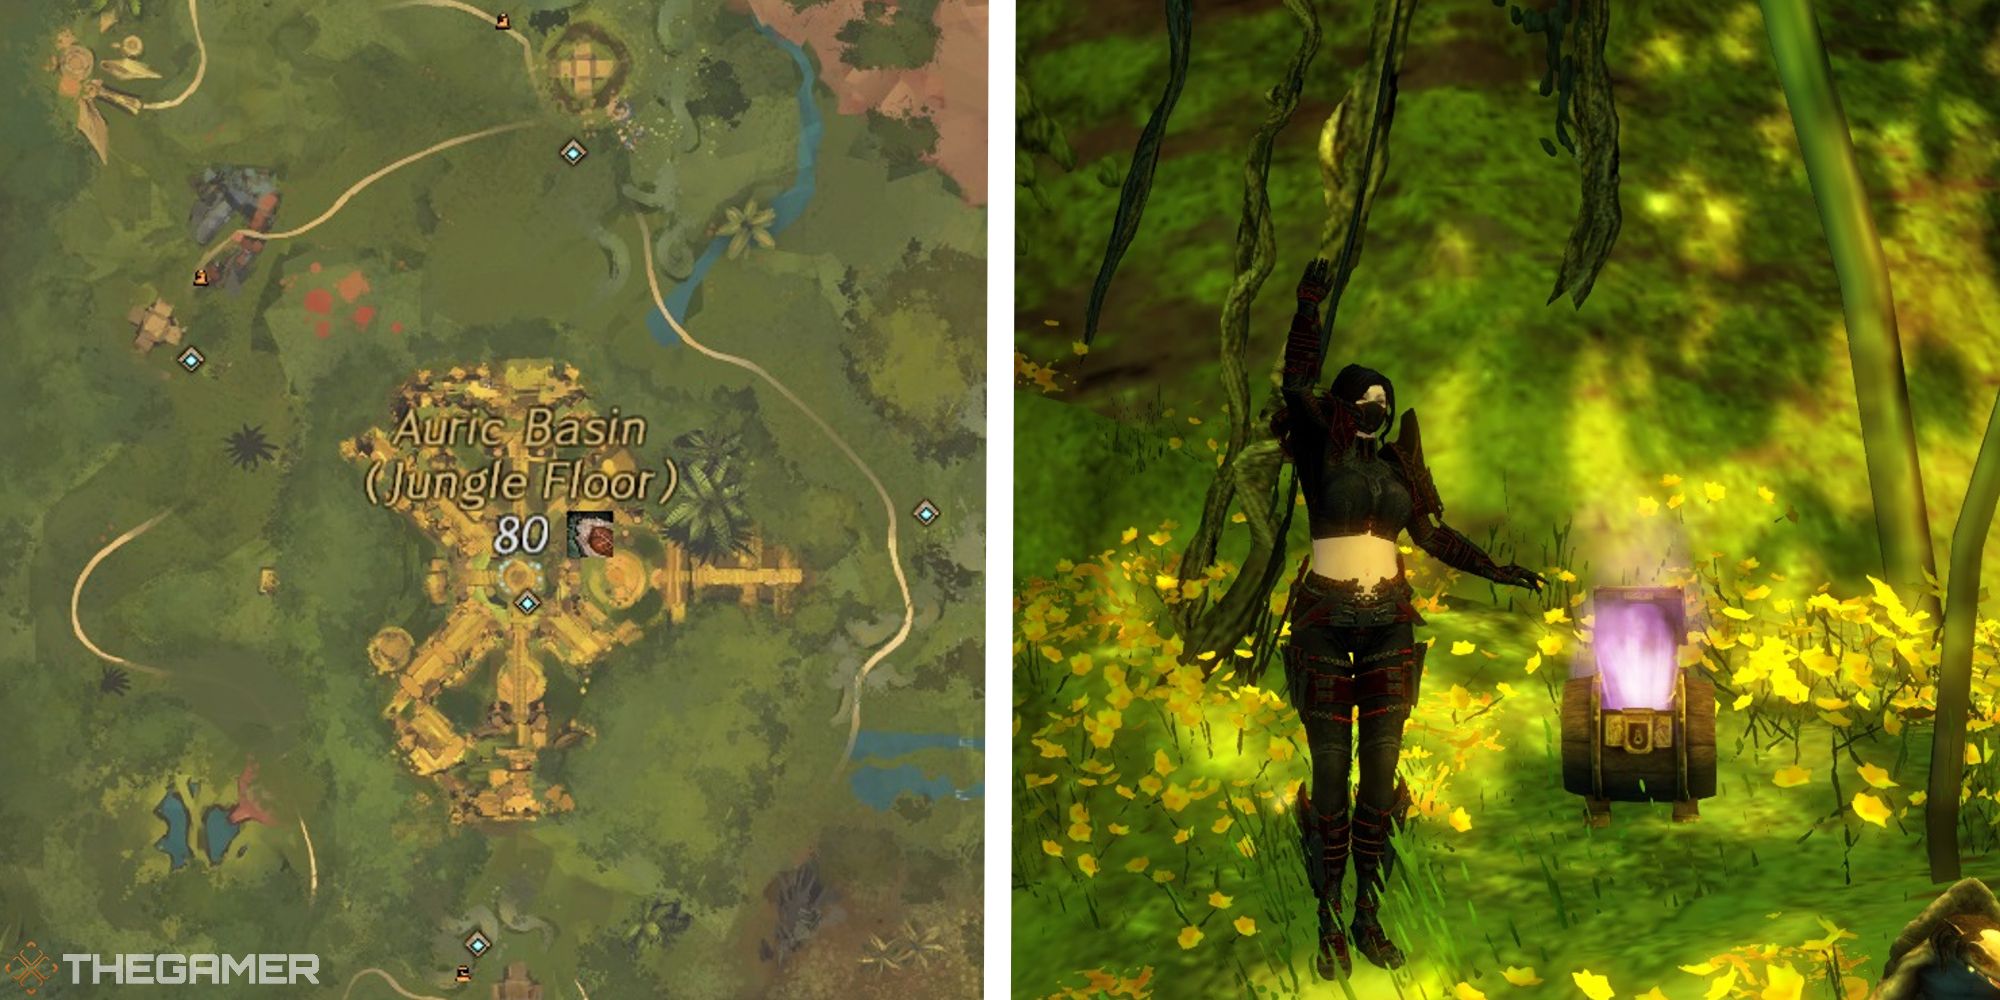 image of auric basin map next to image of player waving next to a strongbox